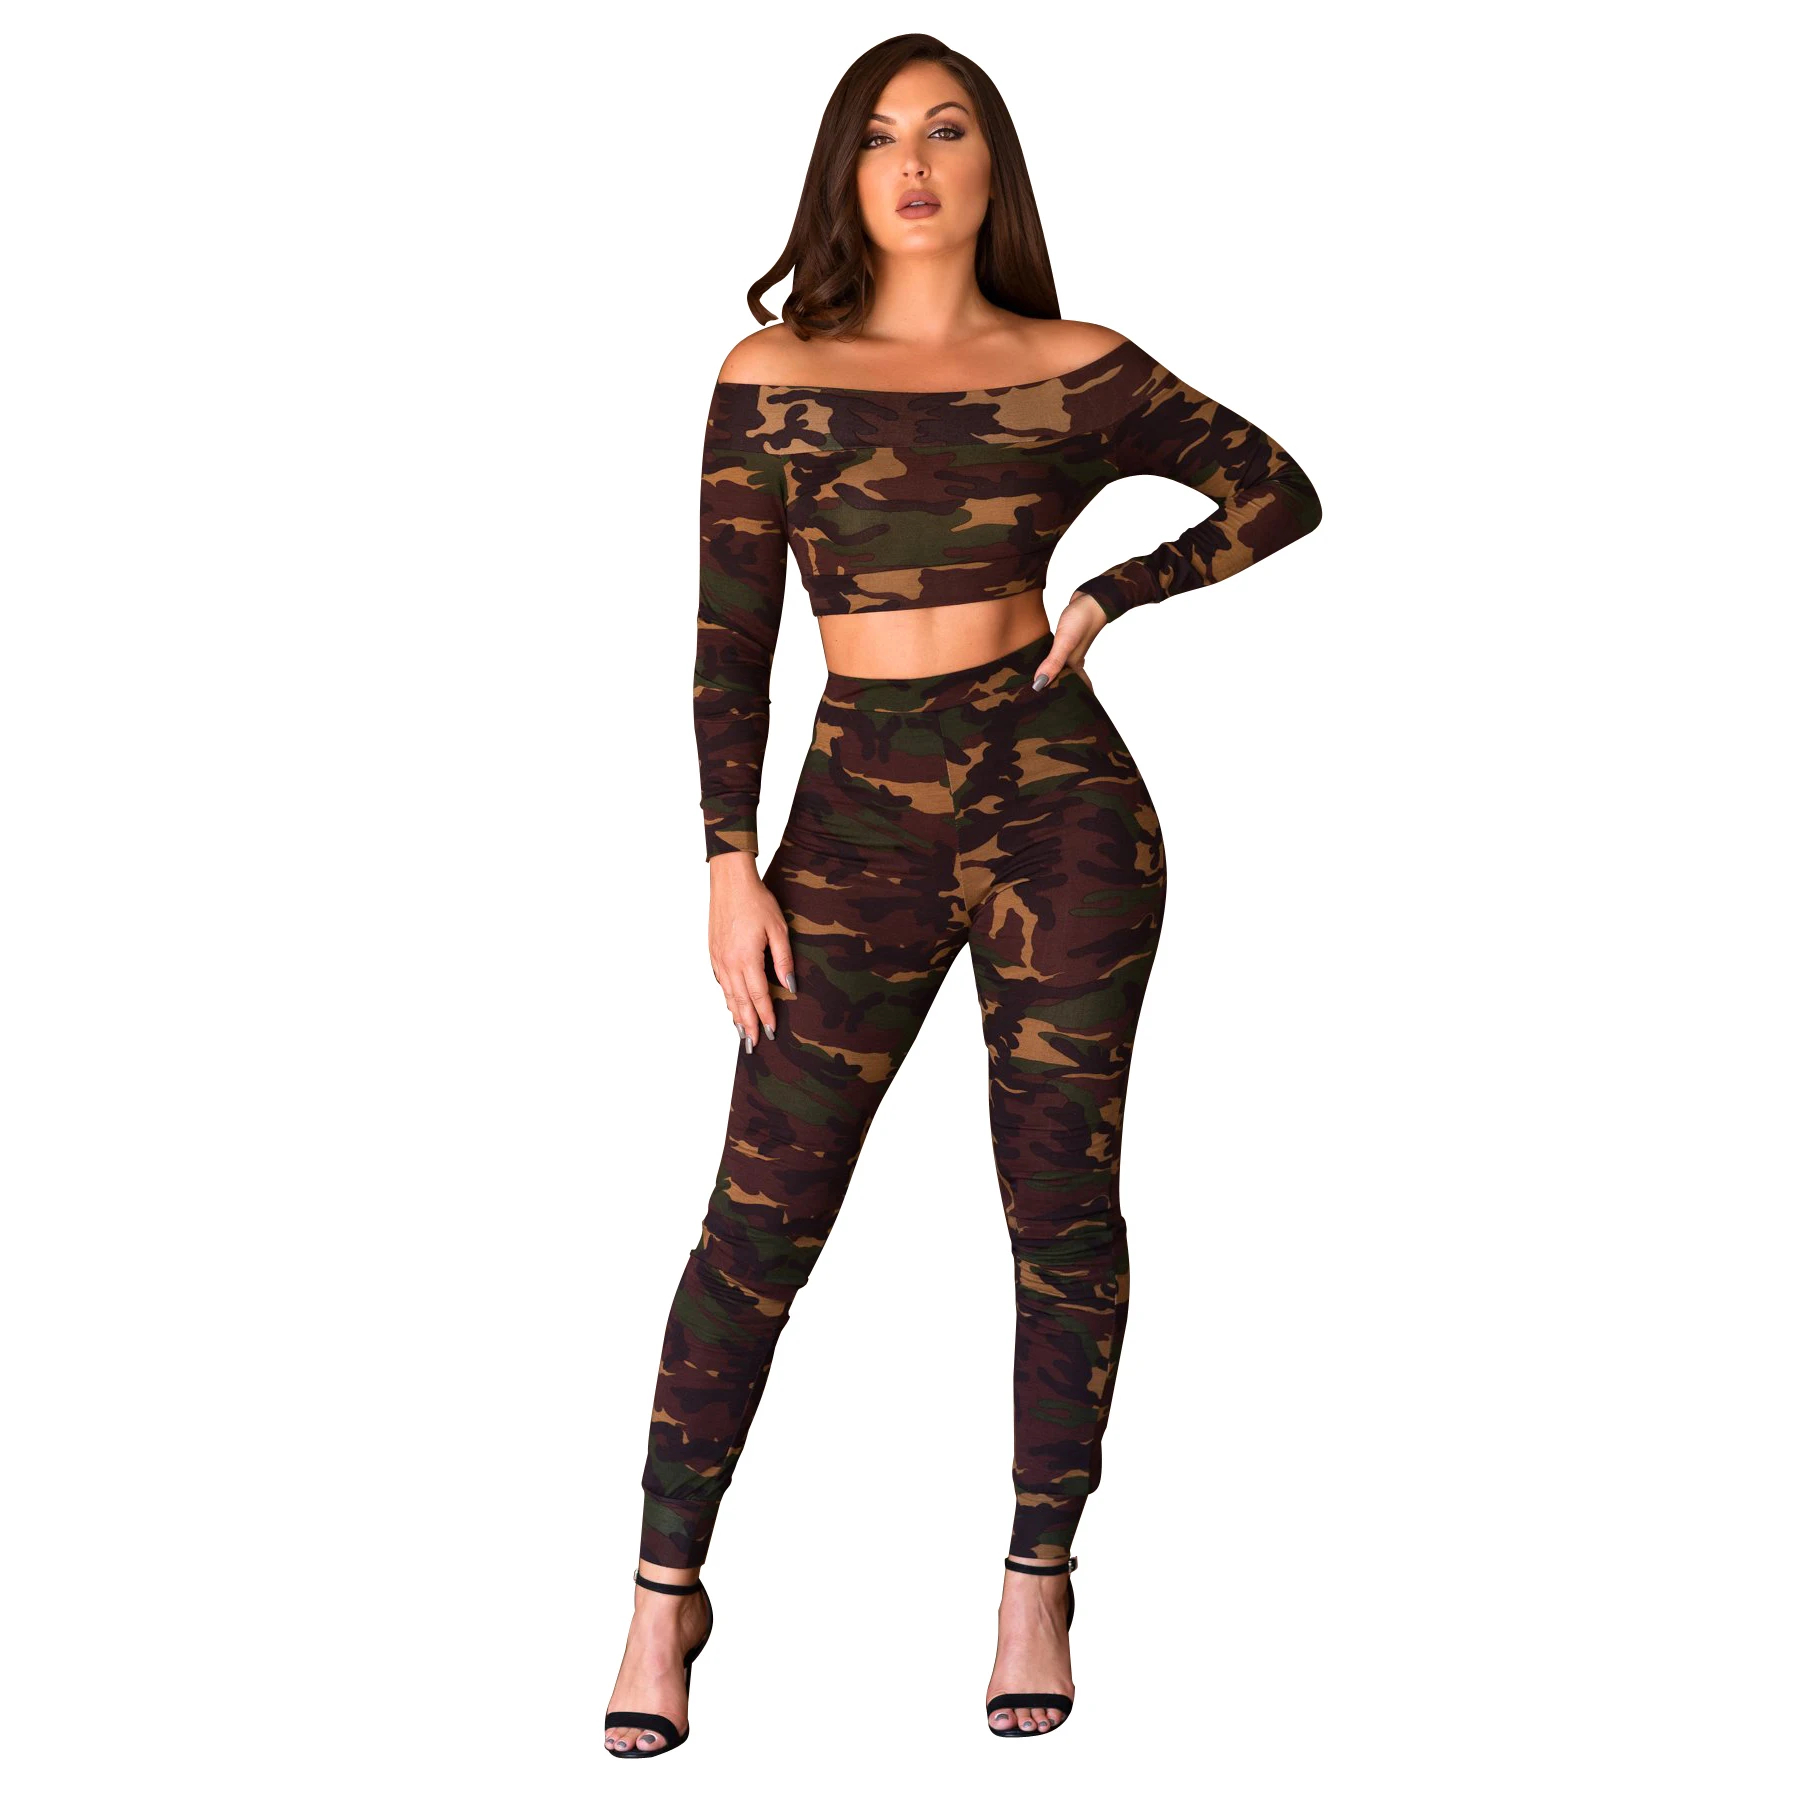 

N15032A Wrapped chest fashion casual camouflage two piece suit pants suit for women, As shown